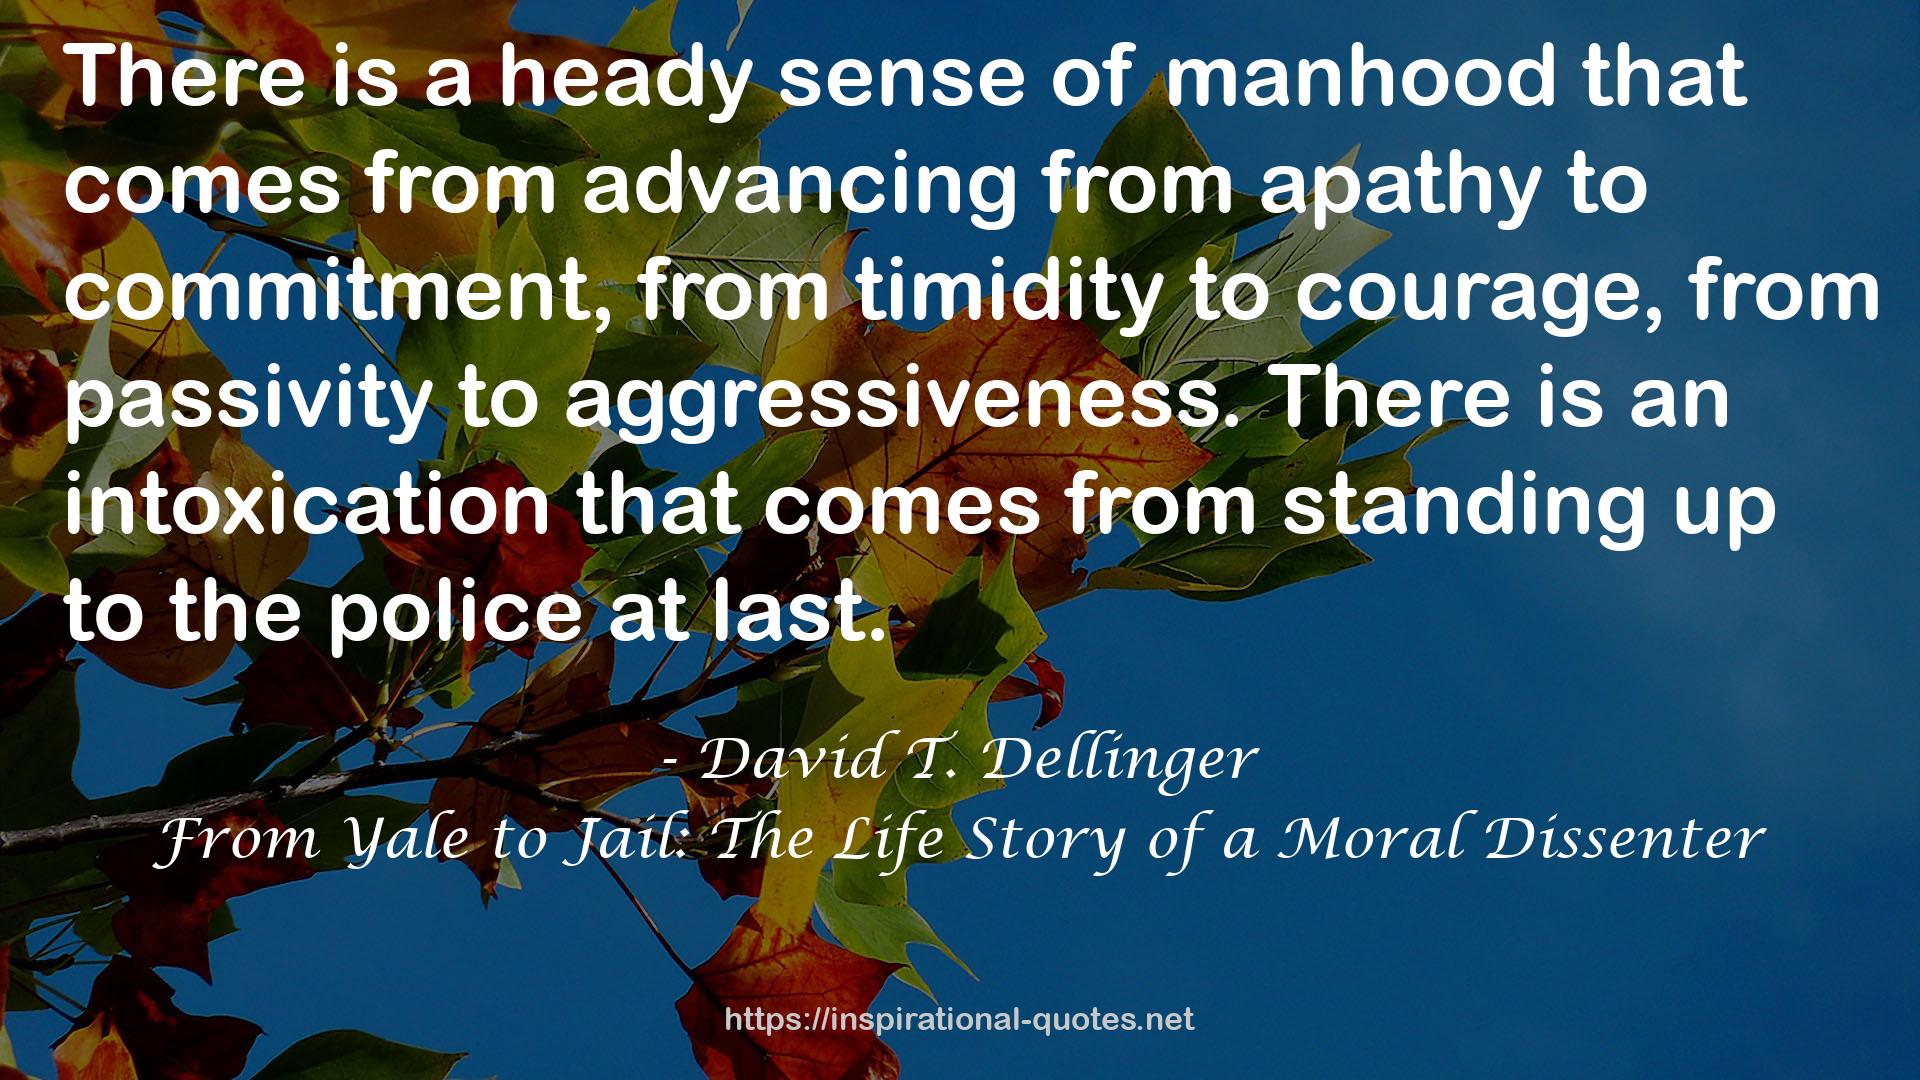 From Yale to Jail: The Life Story of a Moral Dissenter QUOTES